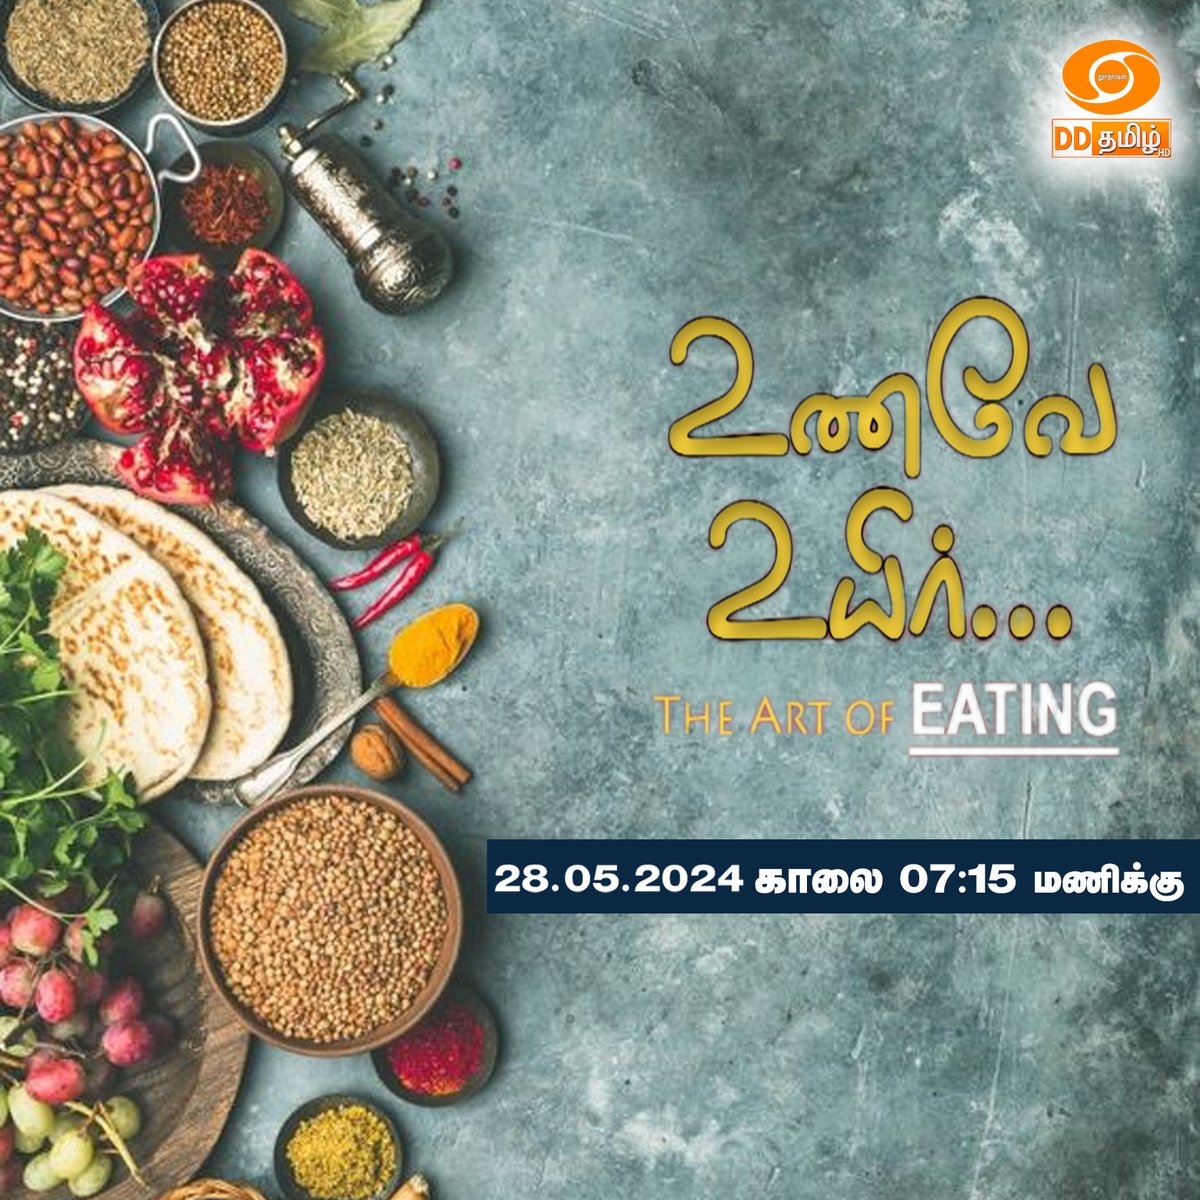 📷 Dive into a gastronomic adventure every morning at 7:15 AM Repeat Telecast with 'The Art of Eating - Unavae Uyir' on DD Tamil
#DDTamil #CulinaryJourney #morningyoga